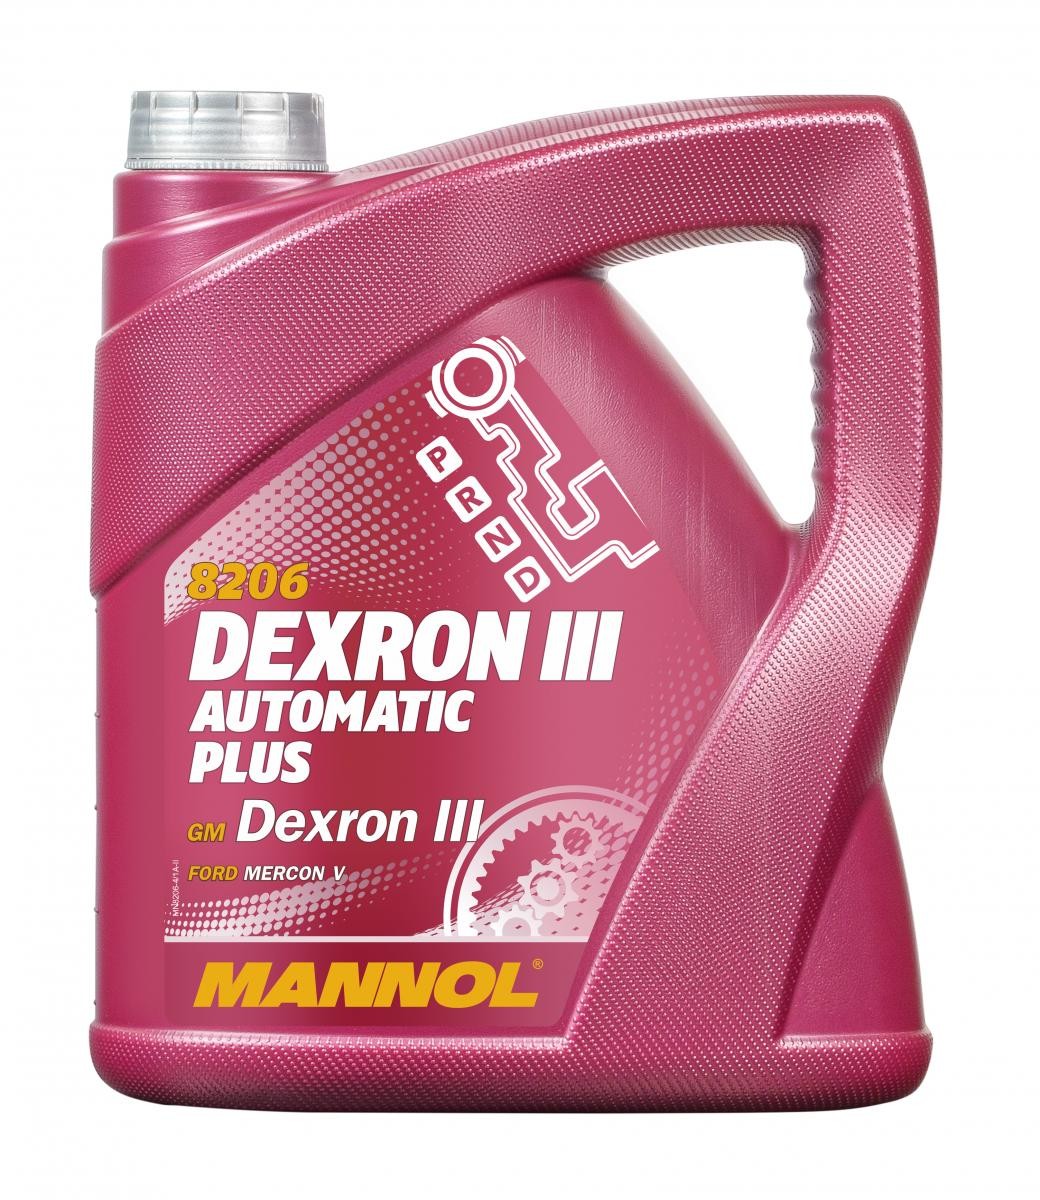 MANNOL Dexron III Automatic, Plus ATF III, 4l, red Automatic transmission oil MN8206-4 buy